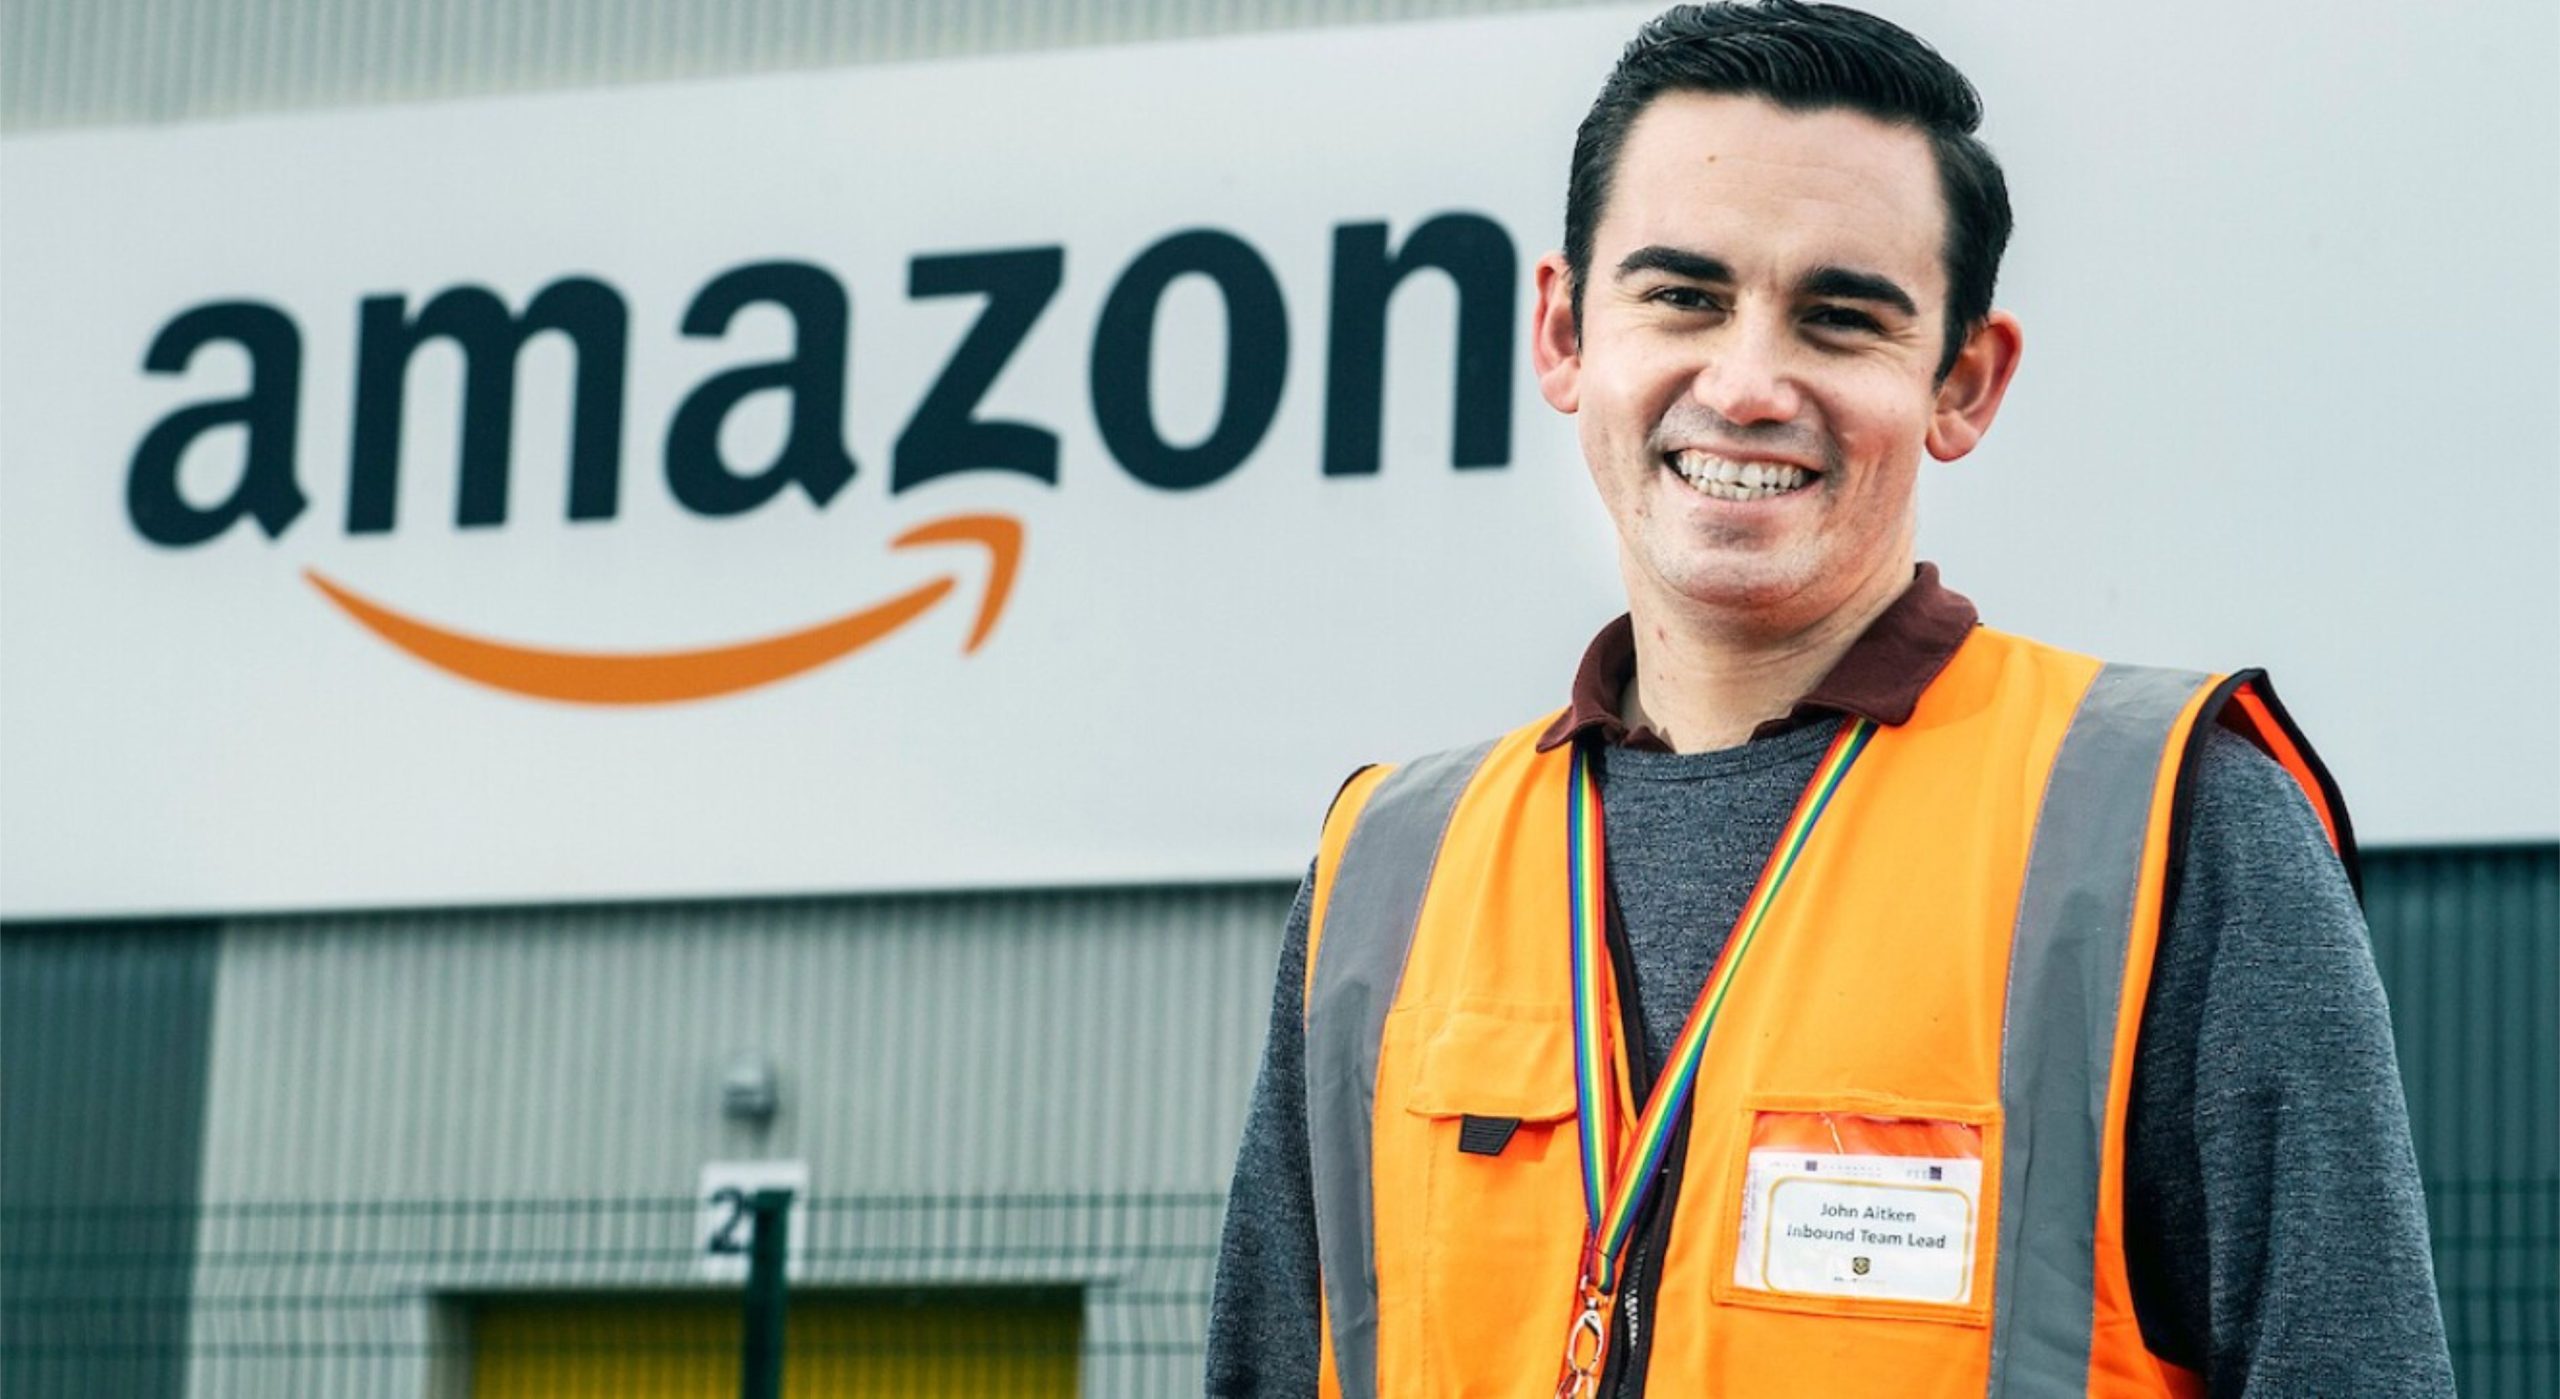 Be a part of Amazon's team: apply today